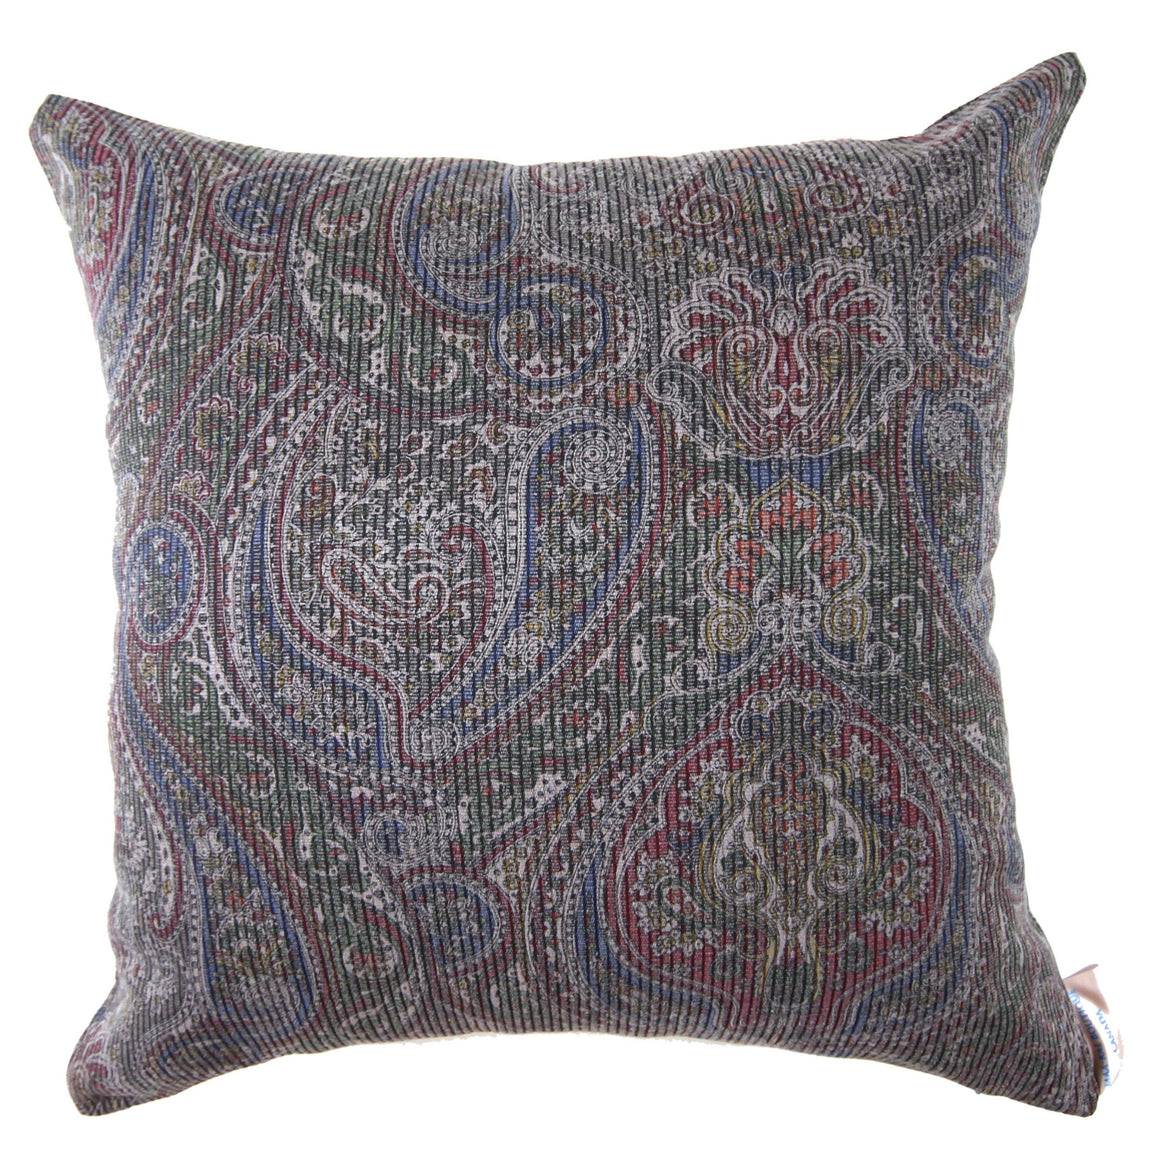 Victoria - Grey Paisley Patterned Pillow Cover - 20x20 - Maa-Kal Boutique Canada